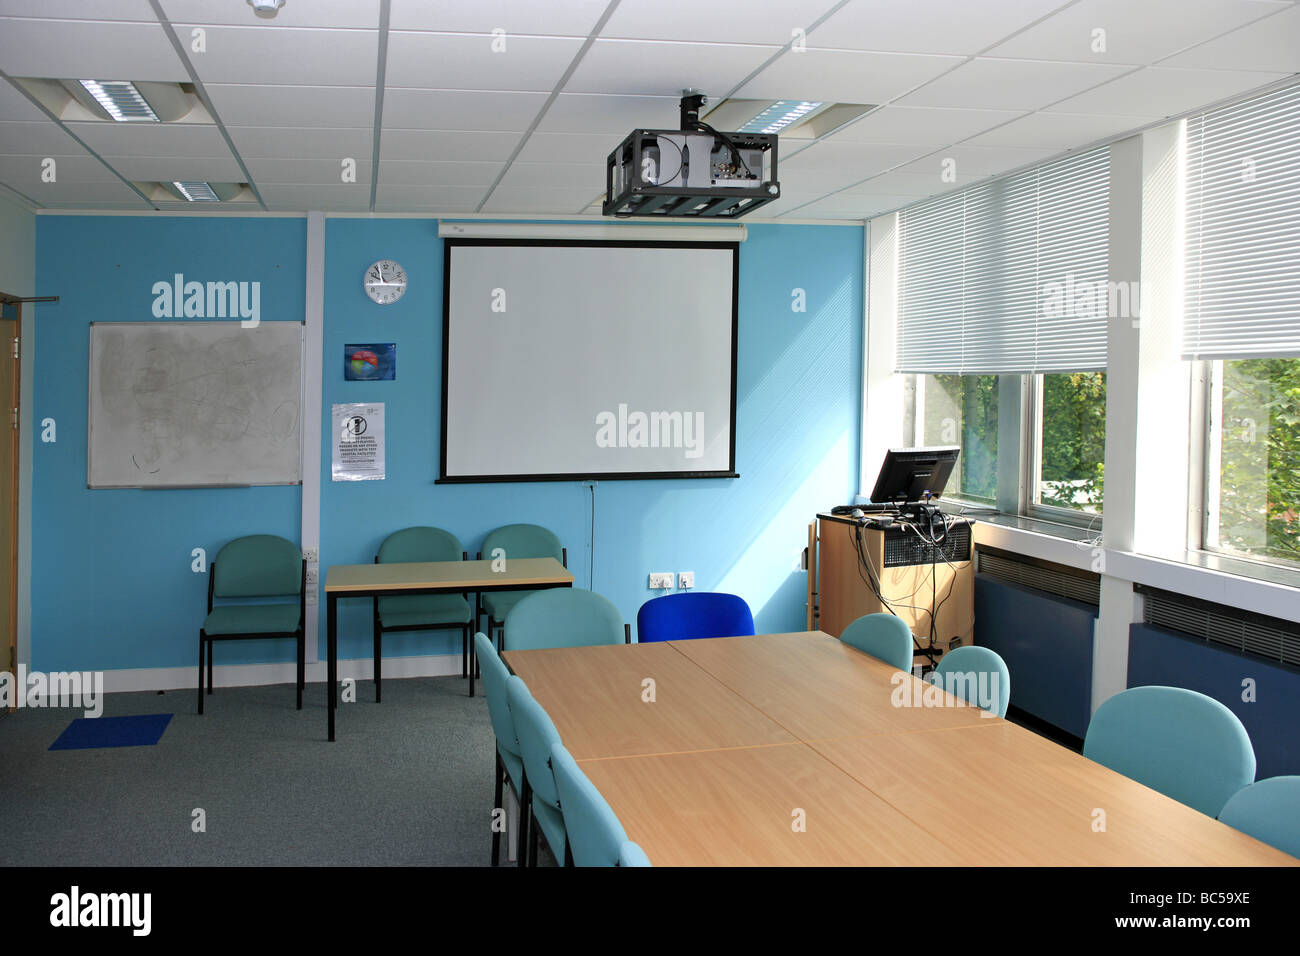 Modern Classroom with laptop projection screen Stock Photo